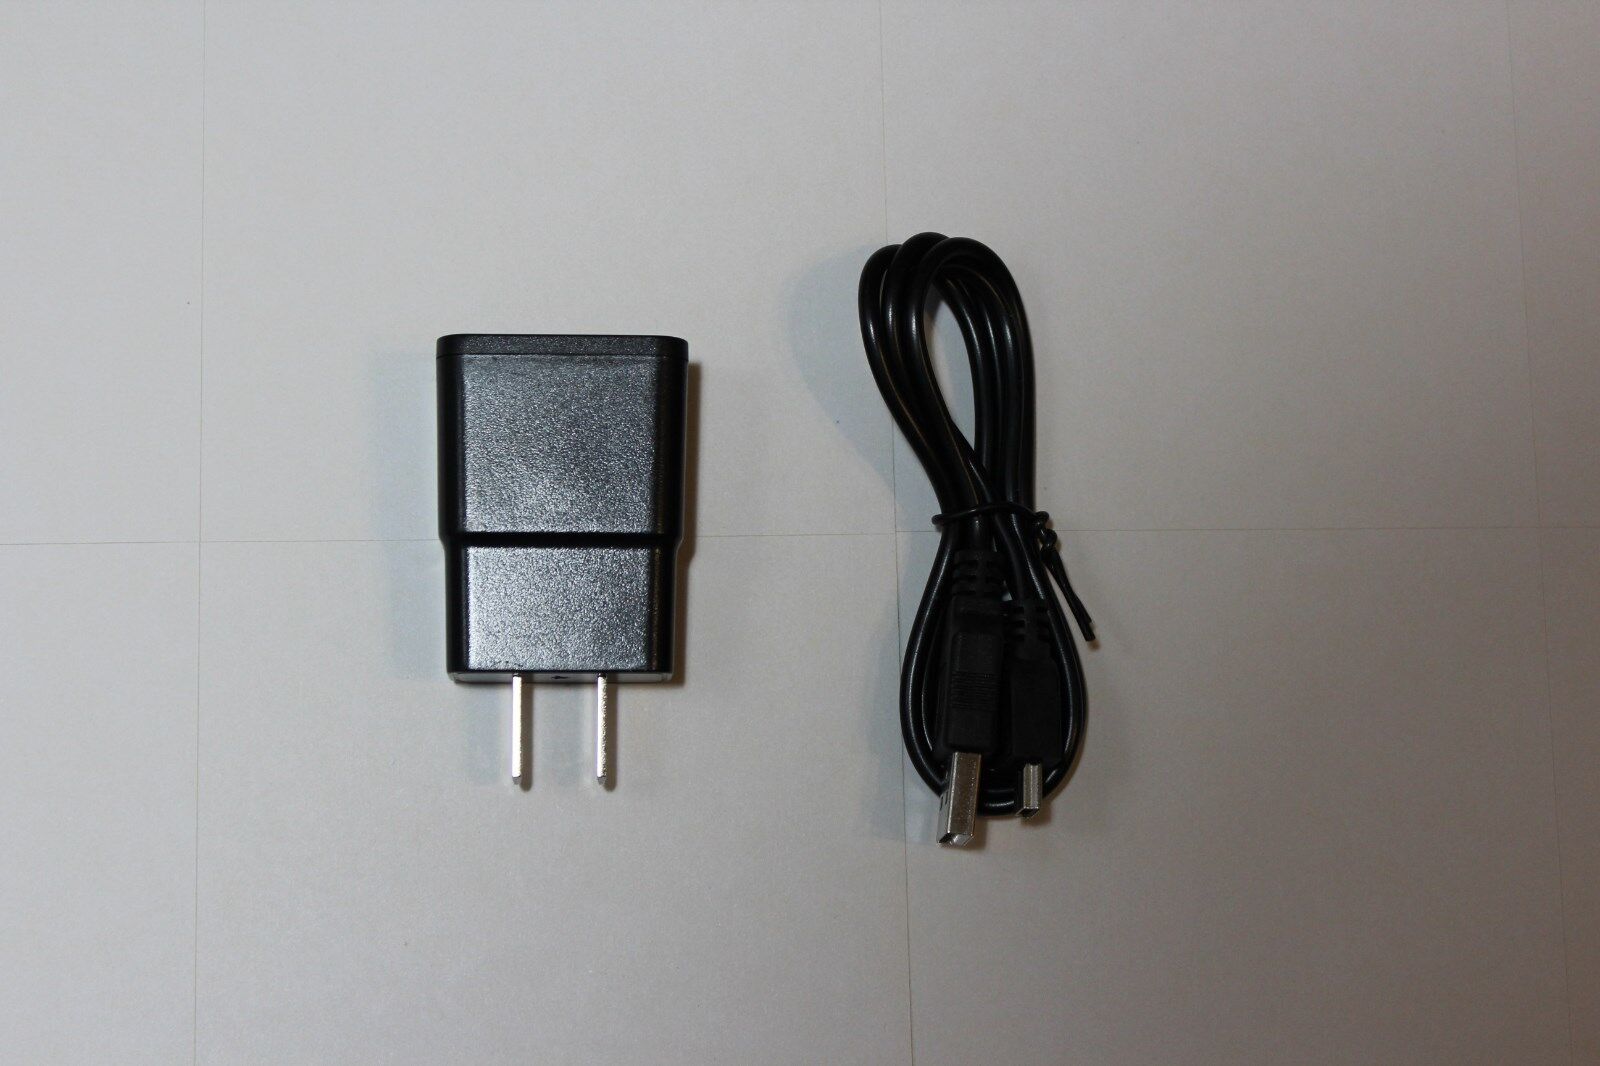 New Factory Charger AC Adapter & USB Cable fits TI-84 Plus C Silver Edition CX Size Handheld Model TI-84 C Silver Editi